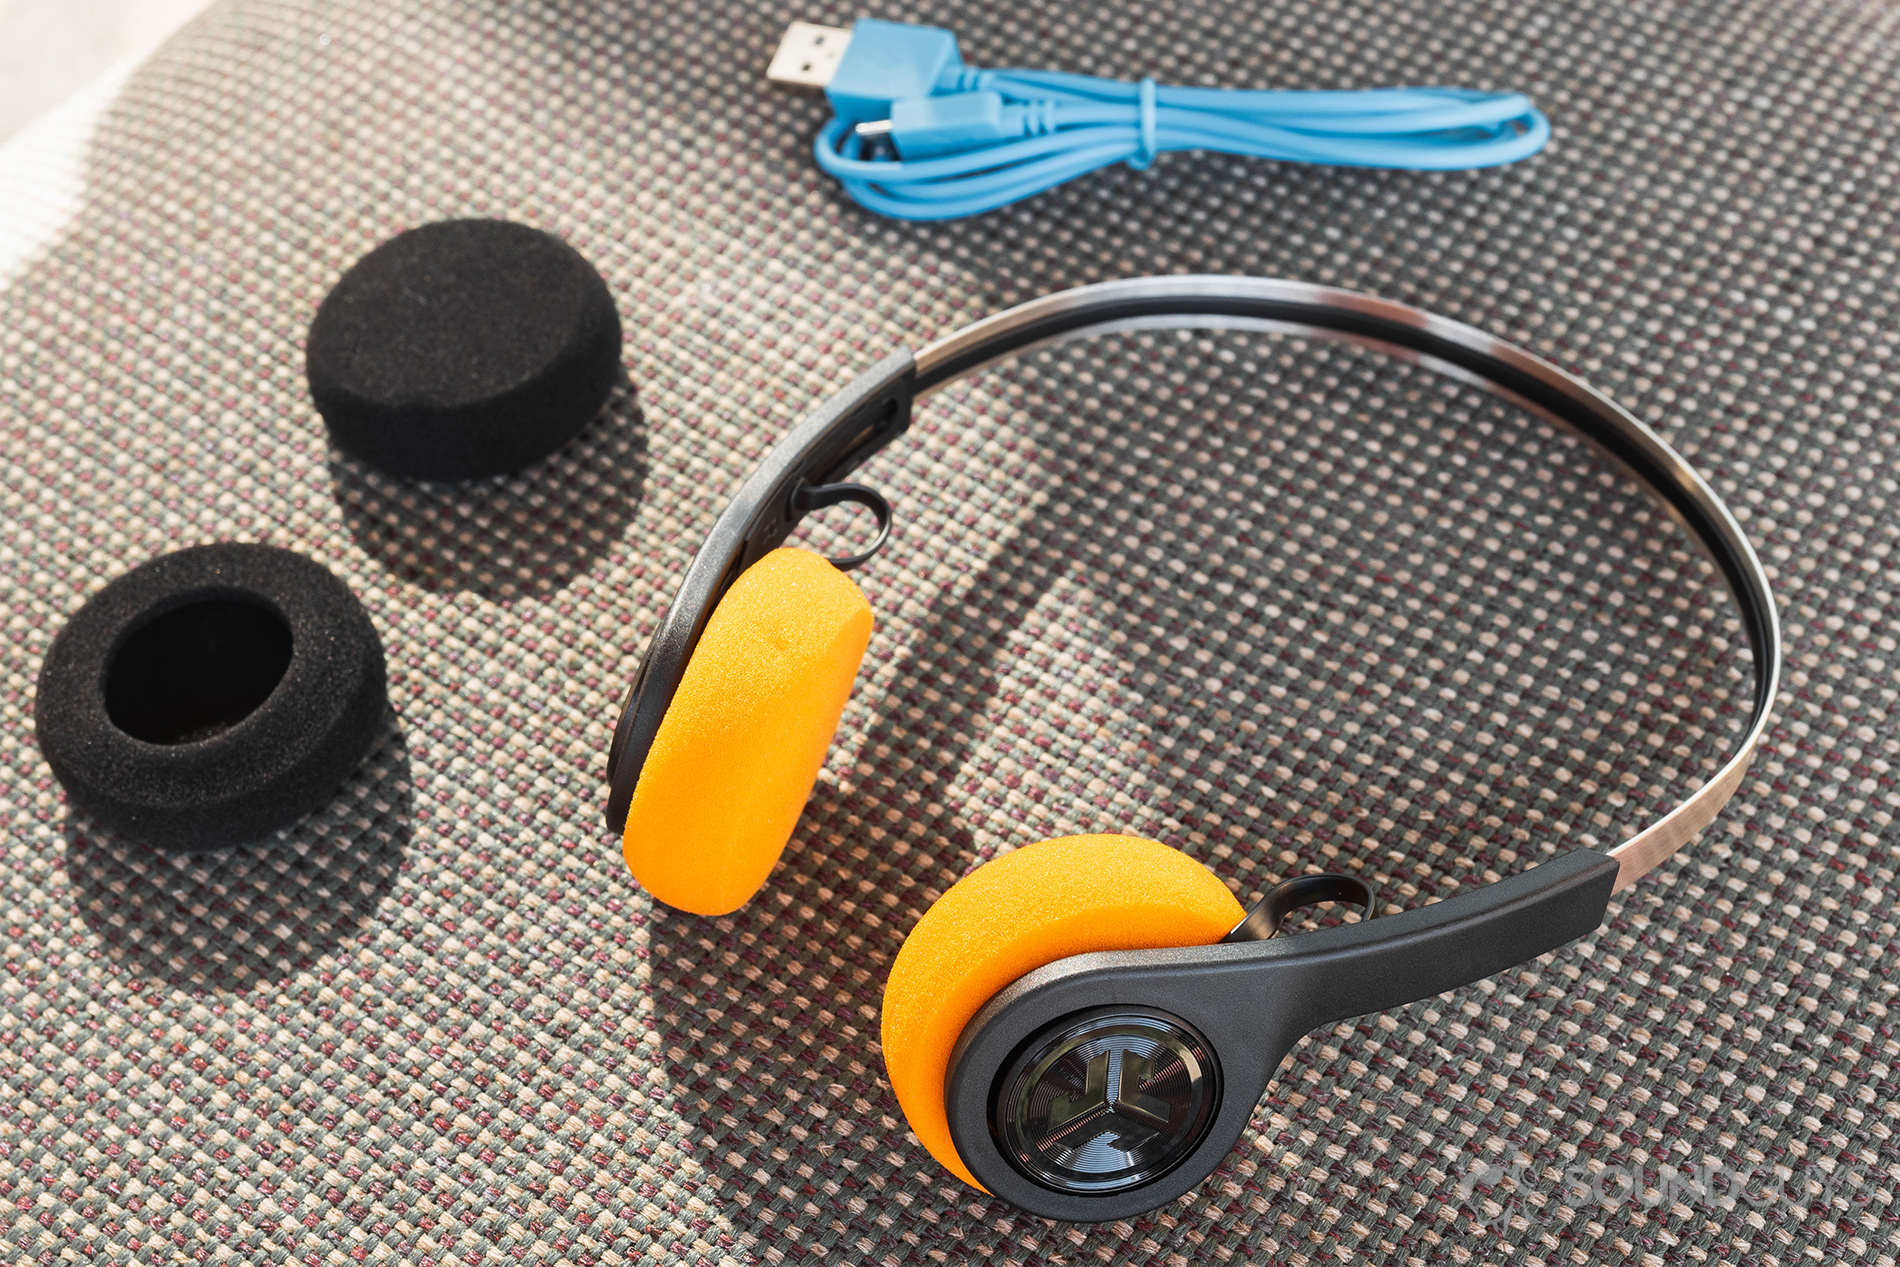 JLab Rewind Wireless Retro: The headphones with the alternative ear pads and blue micro-USB on a fabric surface.